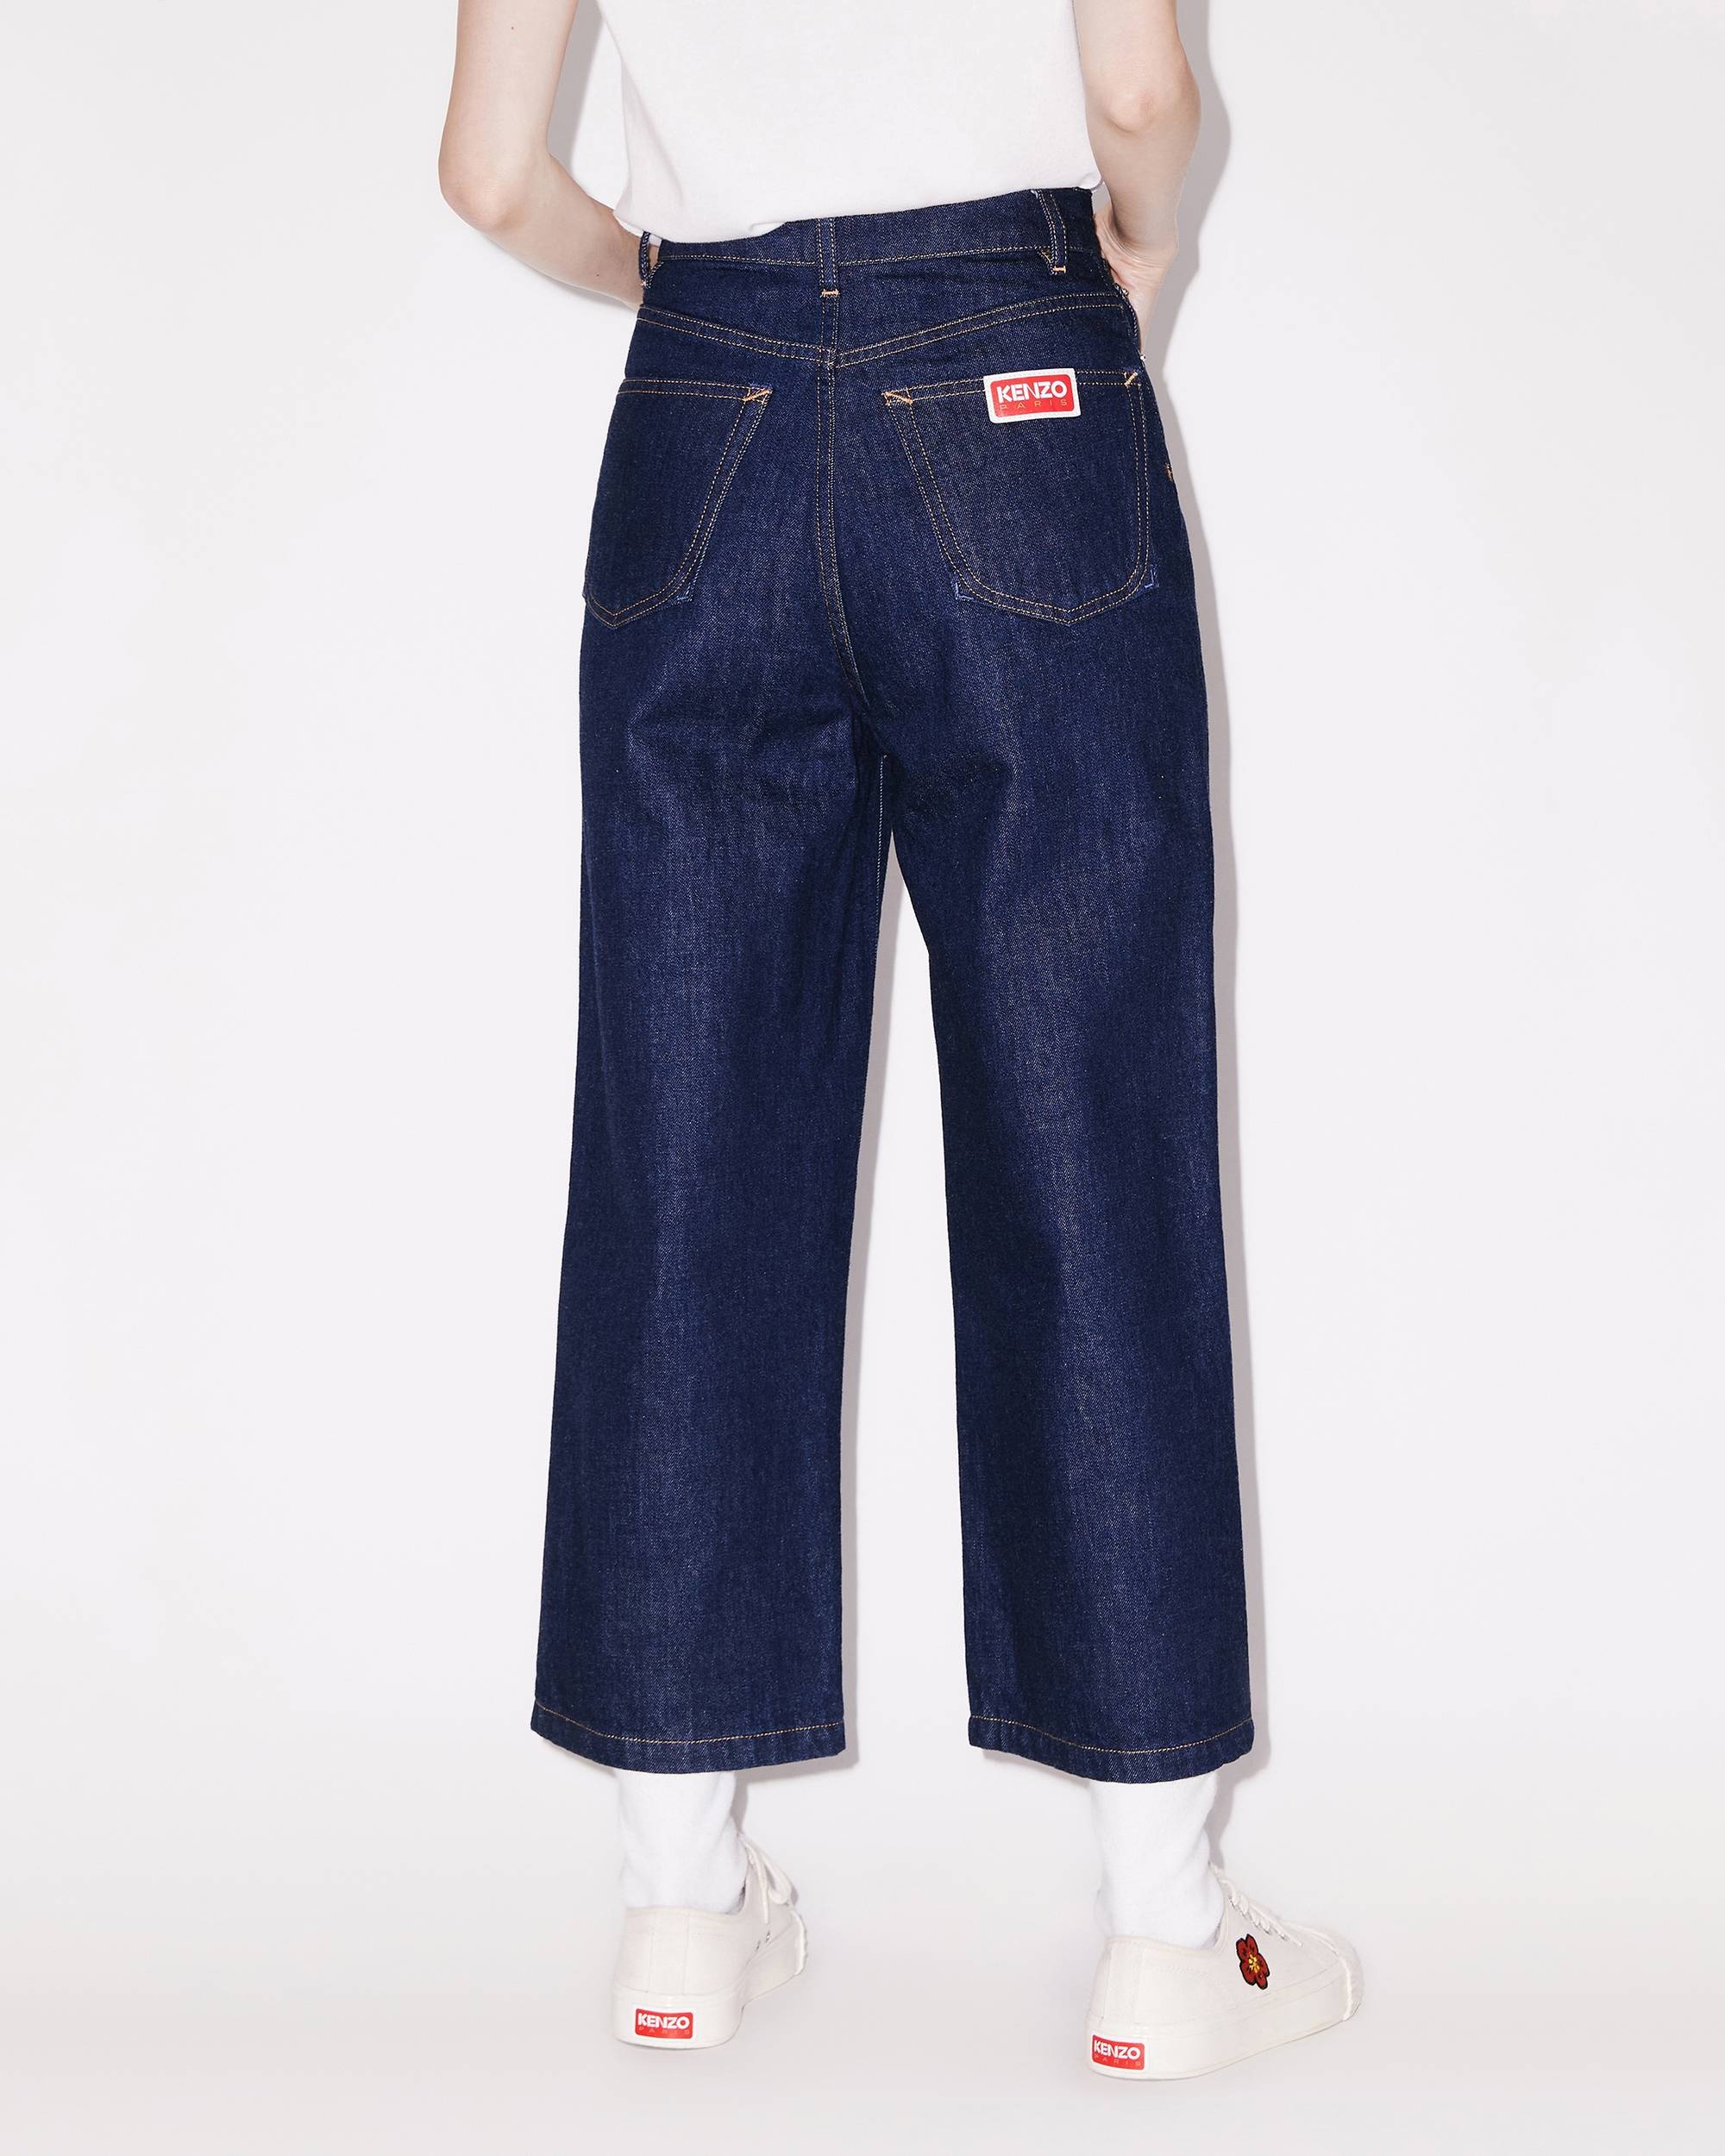 SUMIRE cropped jeans - 5